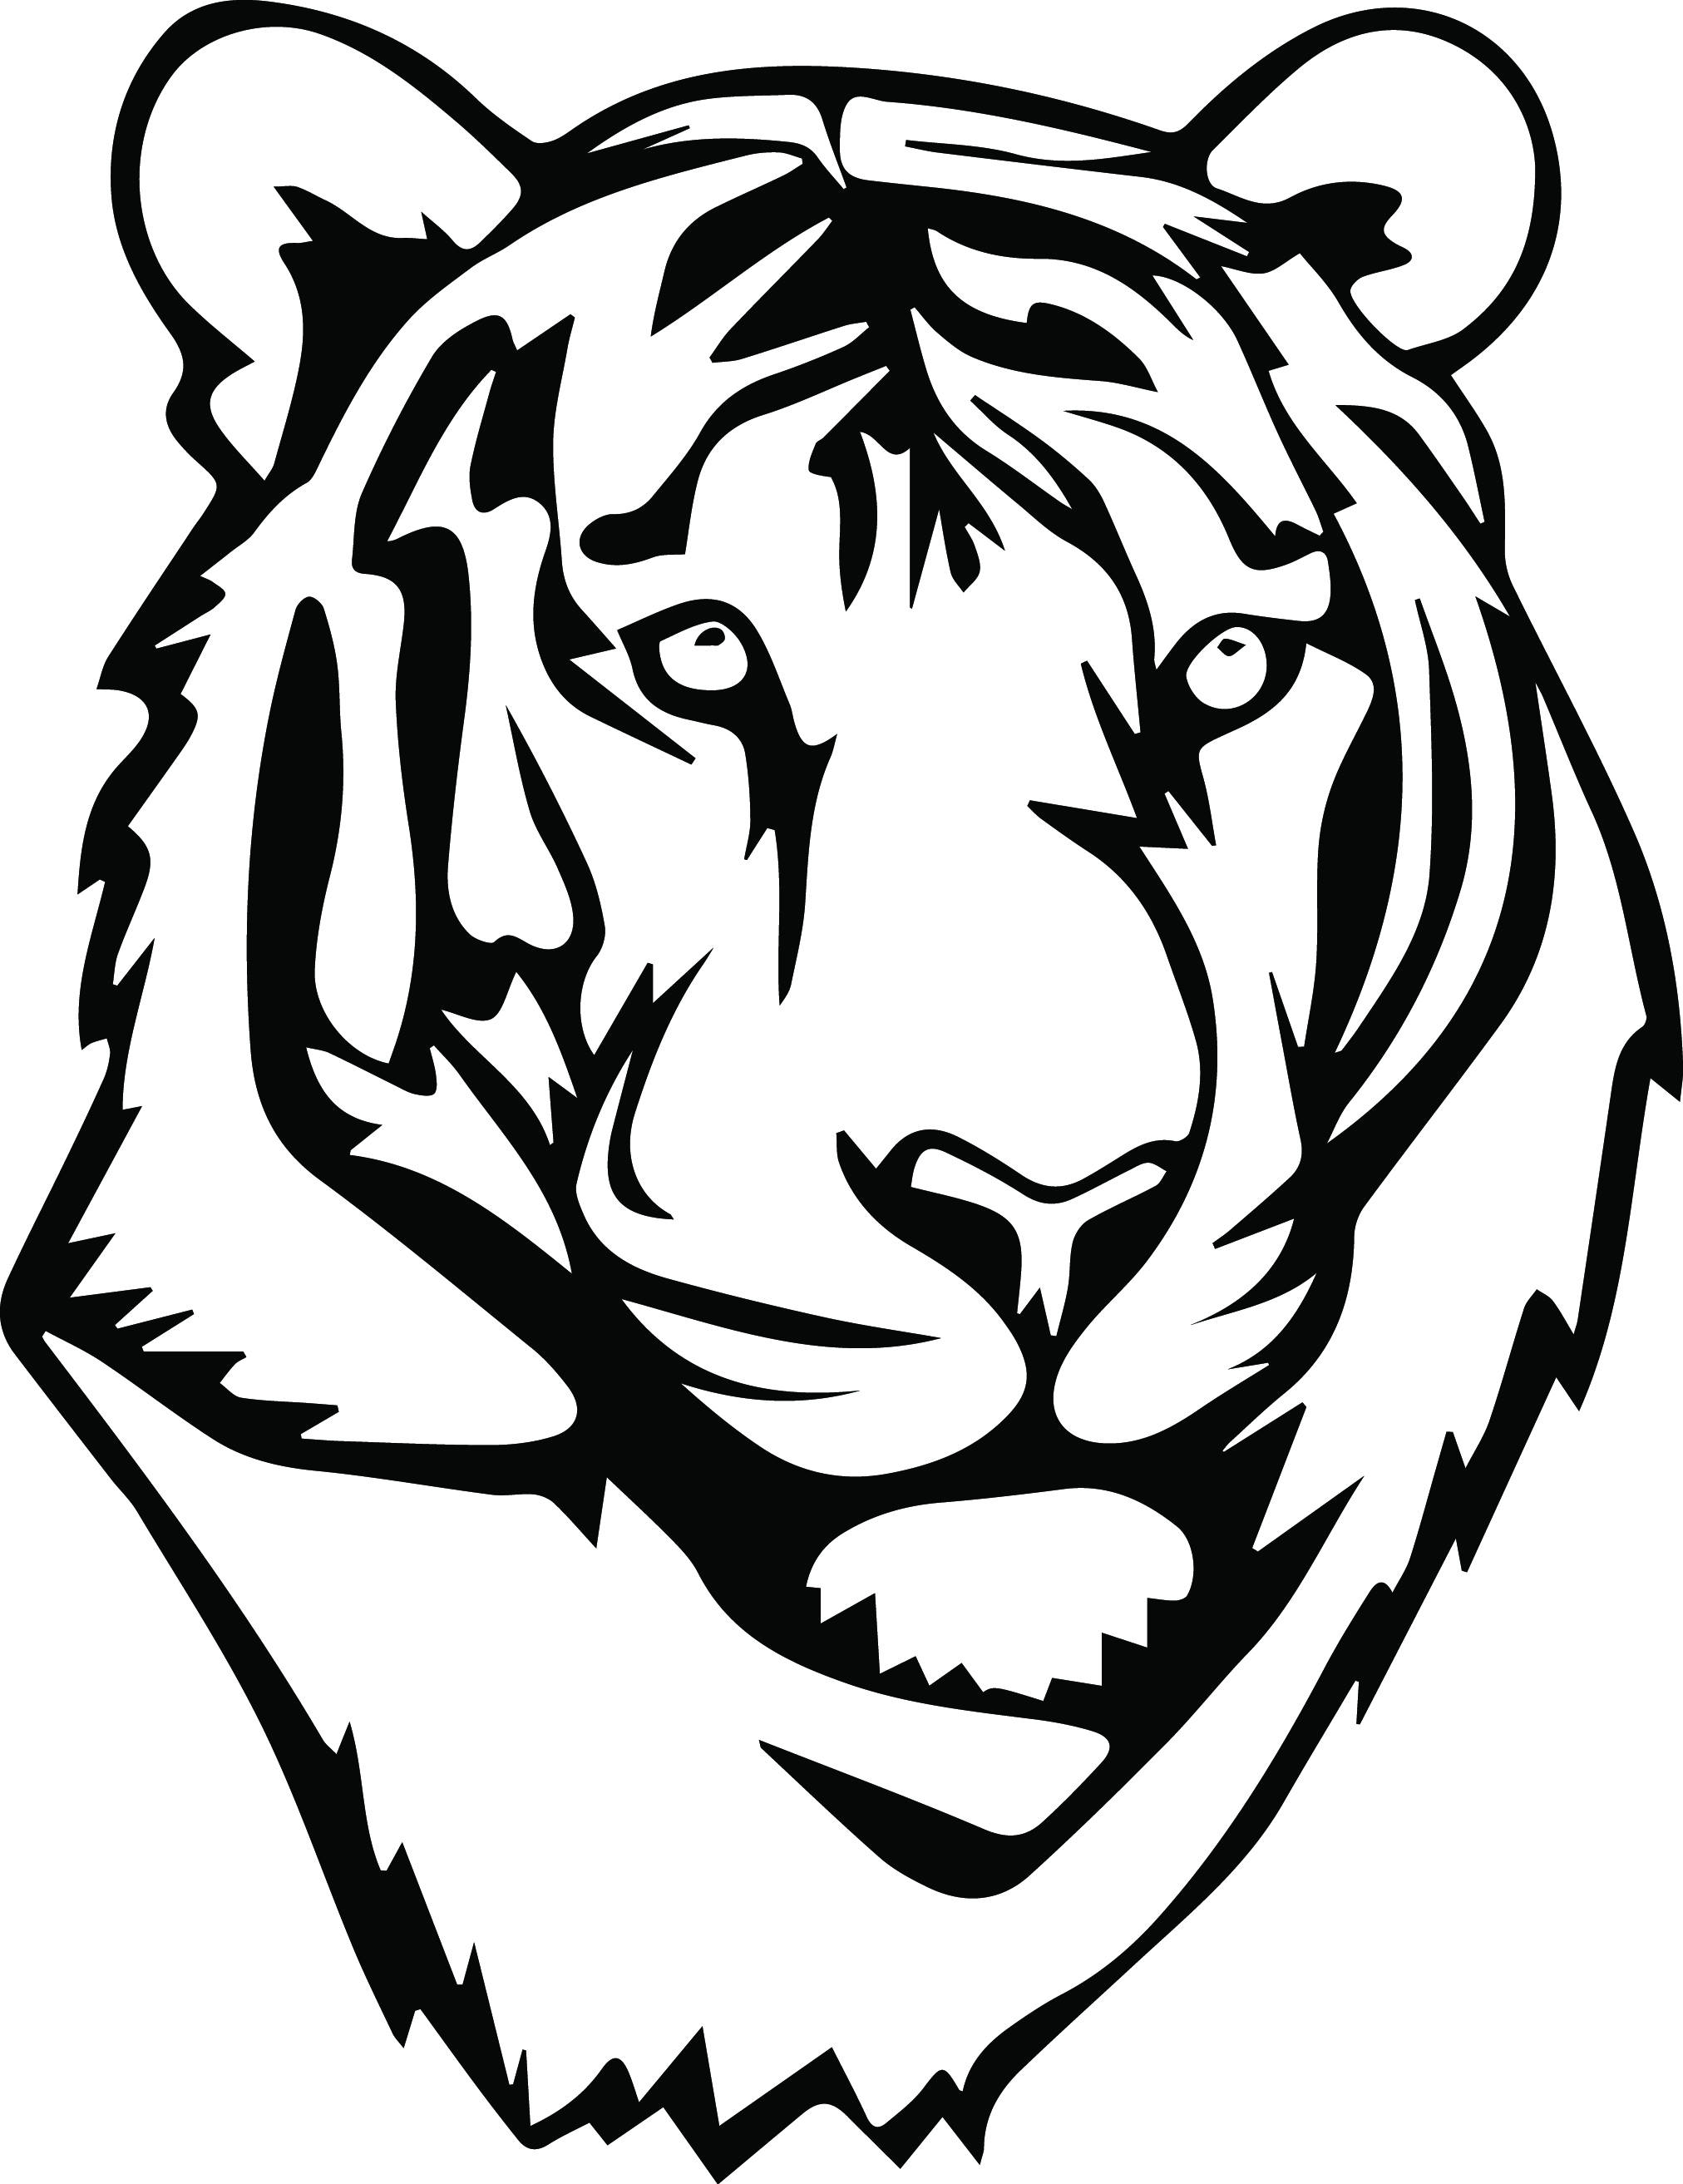 Download Tiger Svg Files Silhouettes Dxf Files Cutting files Cricut